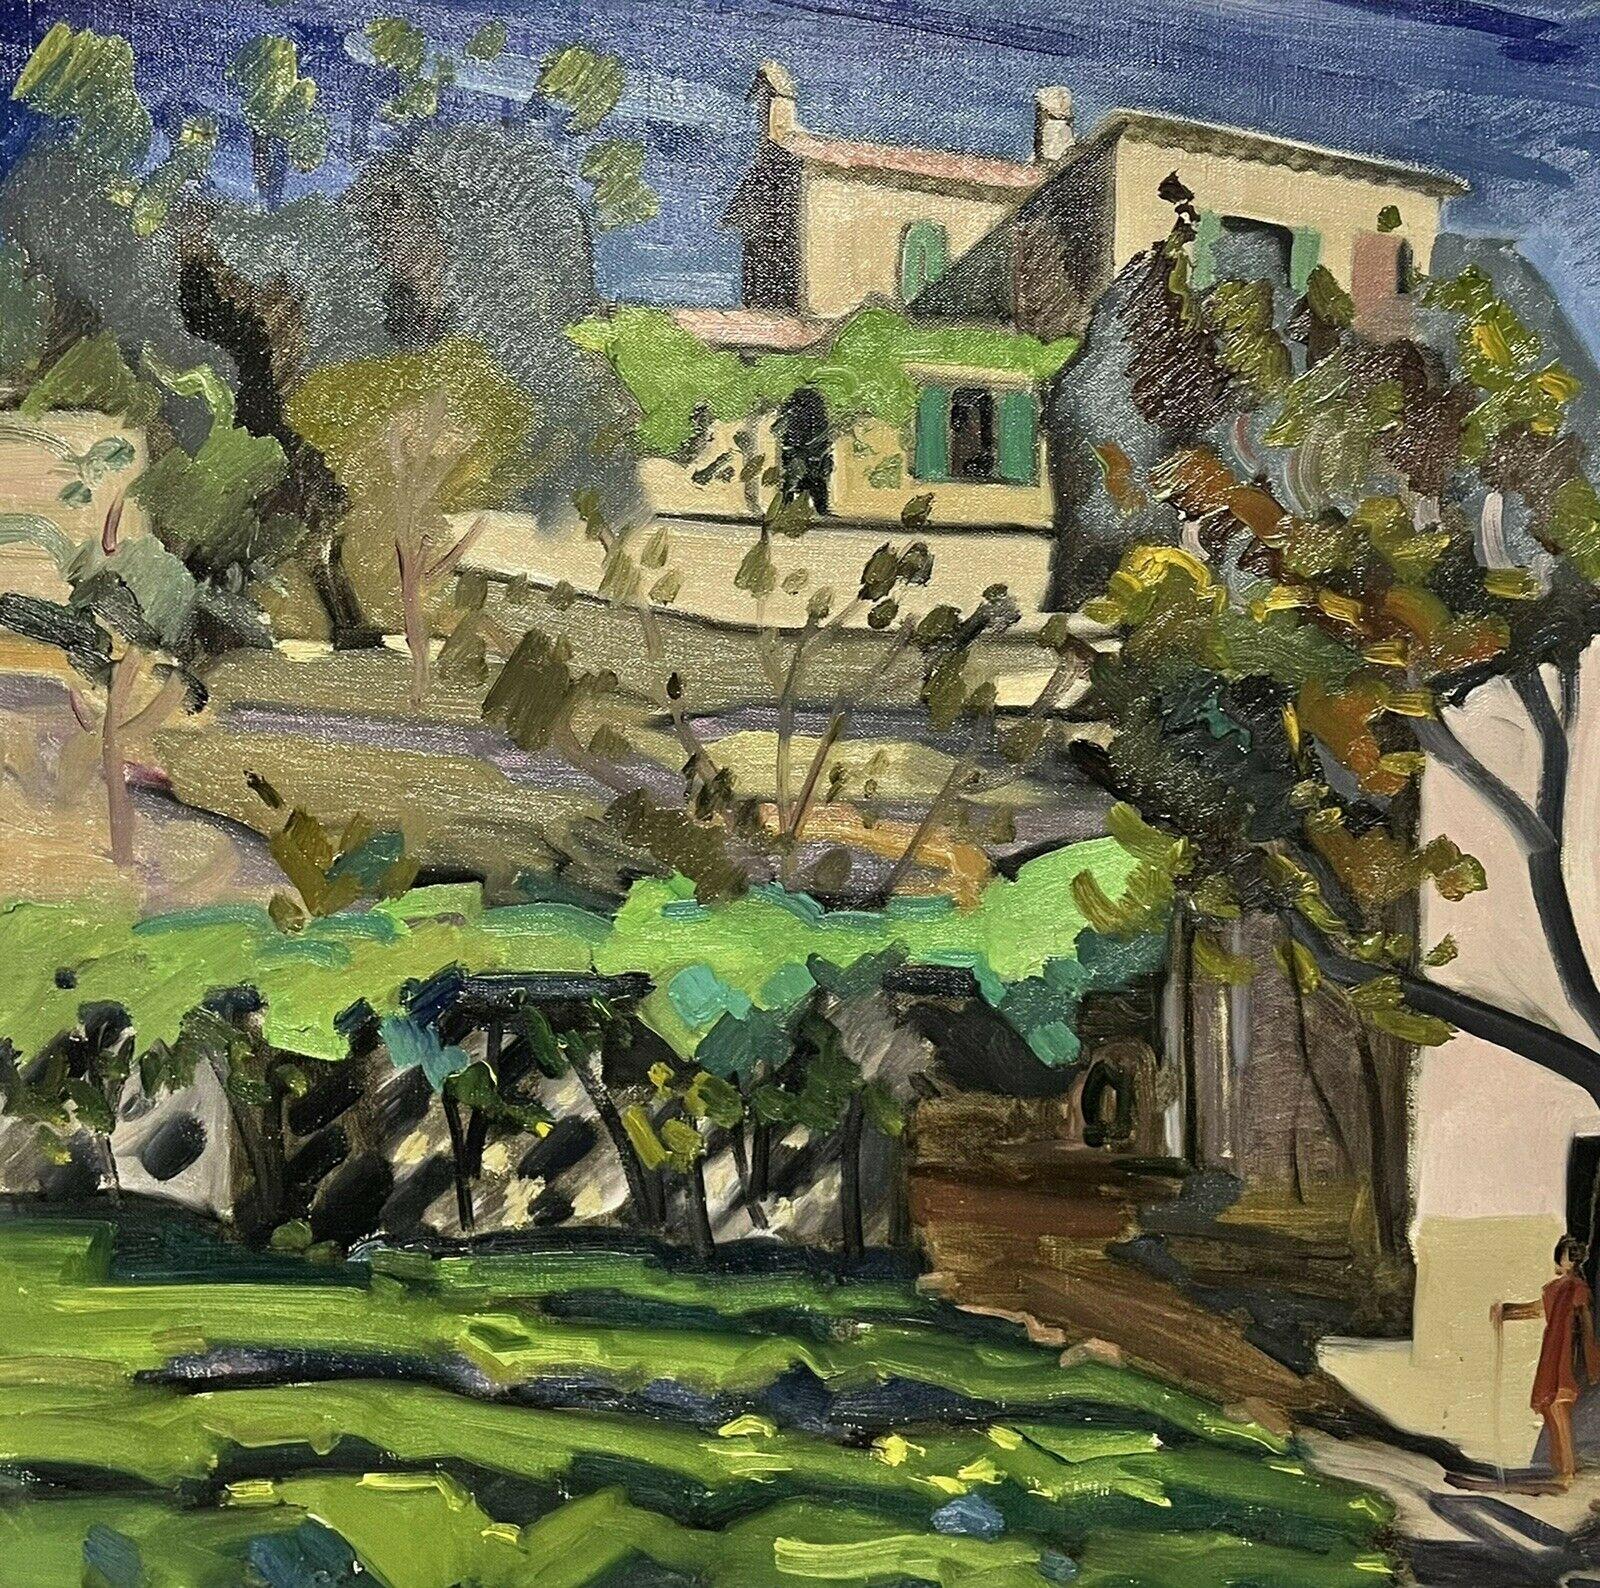 Artist/ School: French Post Impressionist School, circa 1950's

Title: Figures in a sloped Provencal village landscape

Medium: oil painting on canvas, unframed

canvas: 23.75 x 28.75 inches

Provenance: private collection, France

Condition: The